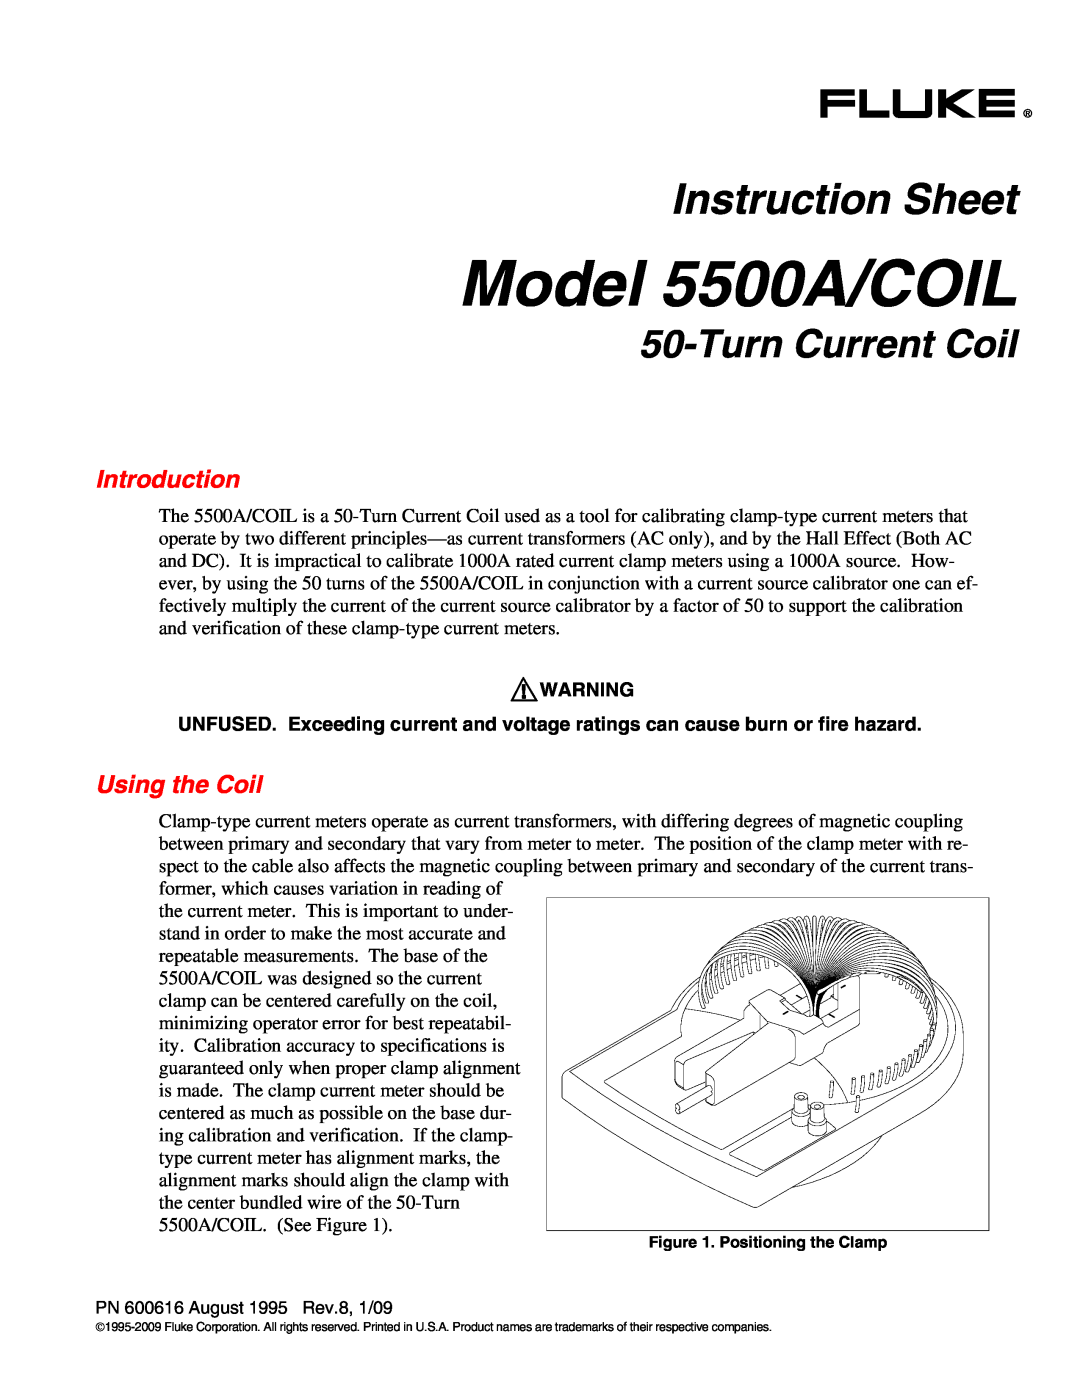 Fluke instruction sheet Introduction, Using the Coil, Pwarning, Model 5500A/COIL, Instruction Sheet, Turn Current Coil 